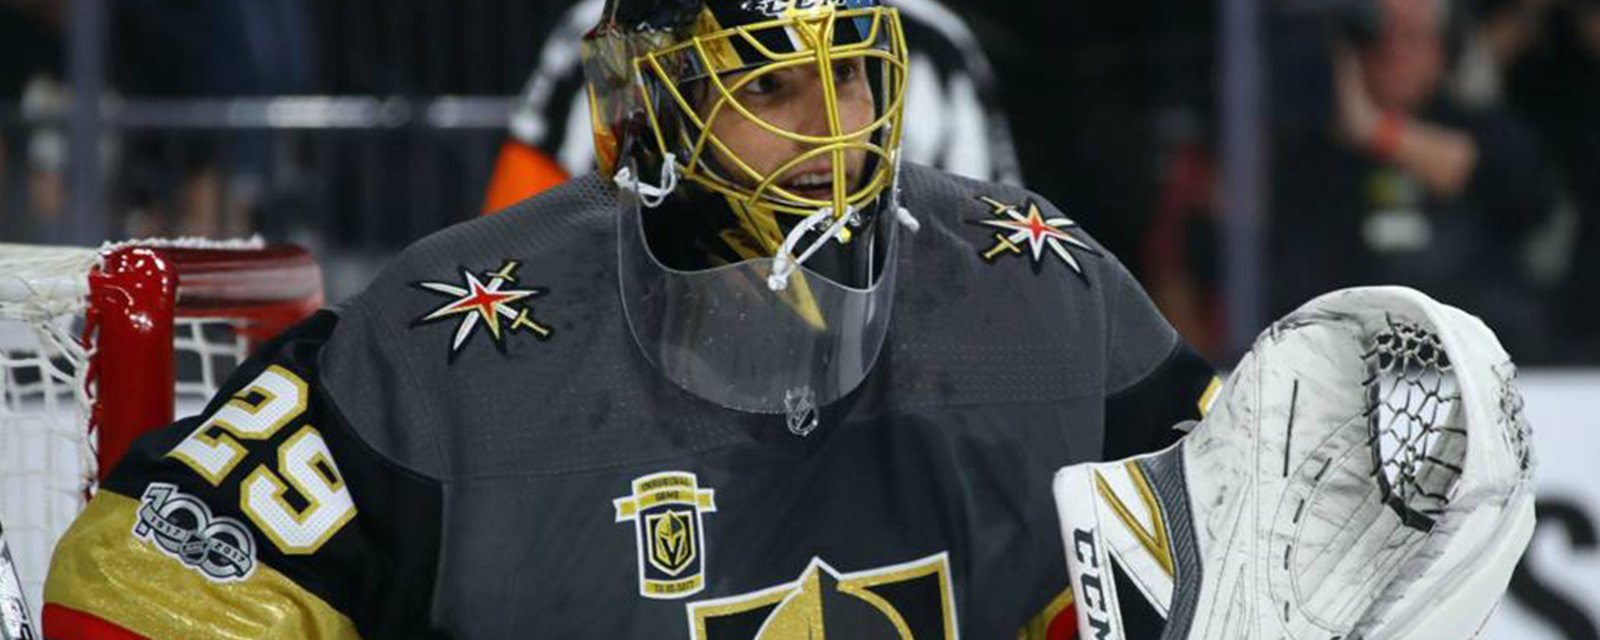 Breaking: Finally some good news for Fleury and Vegas